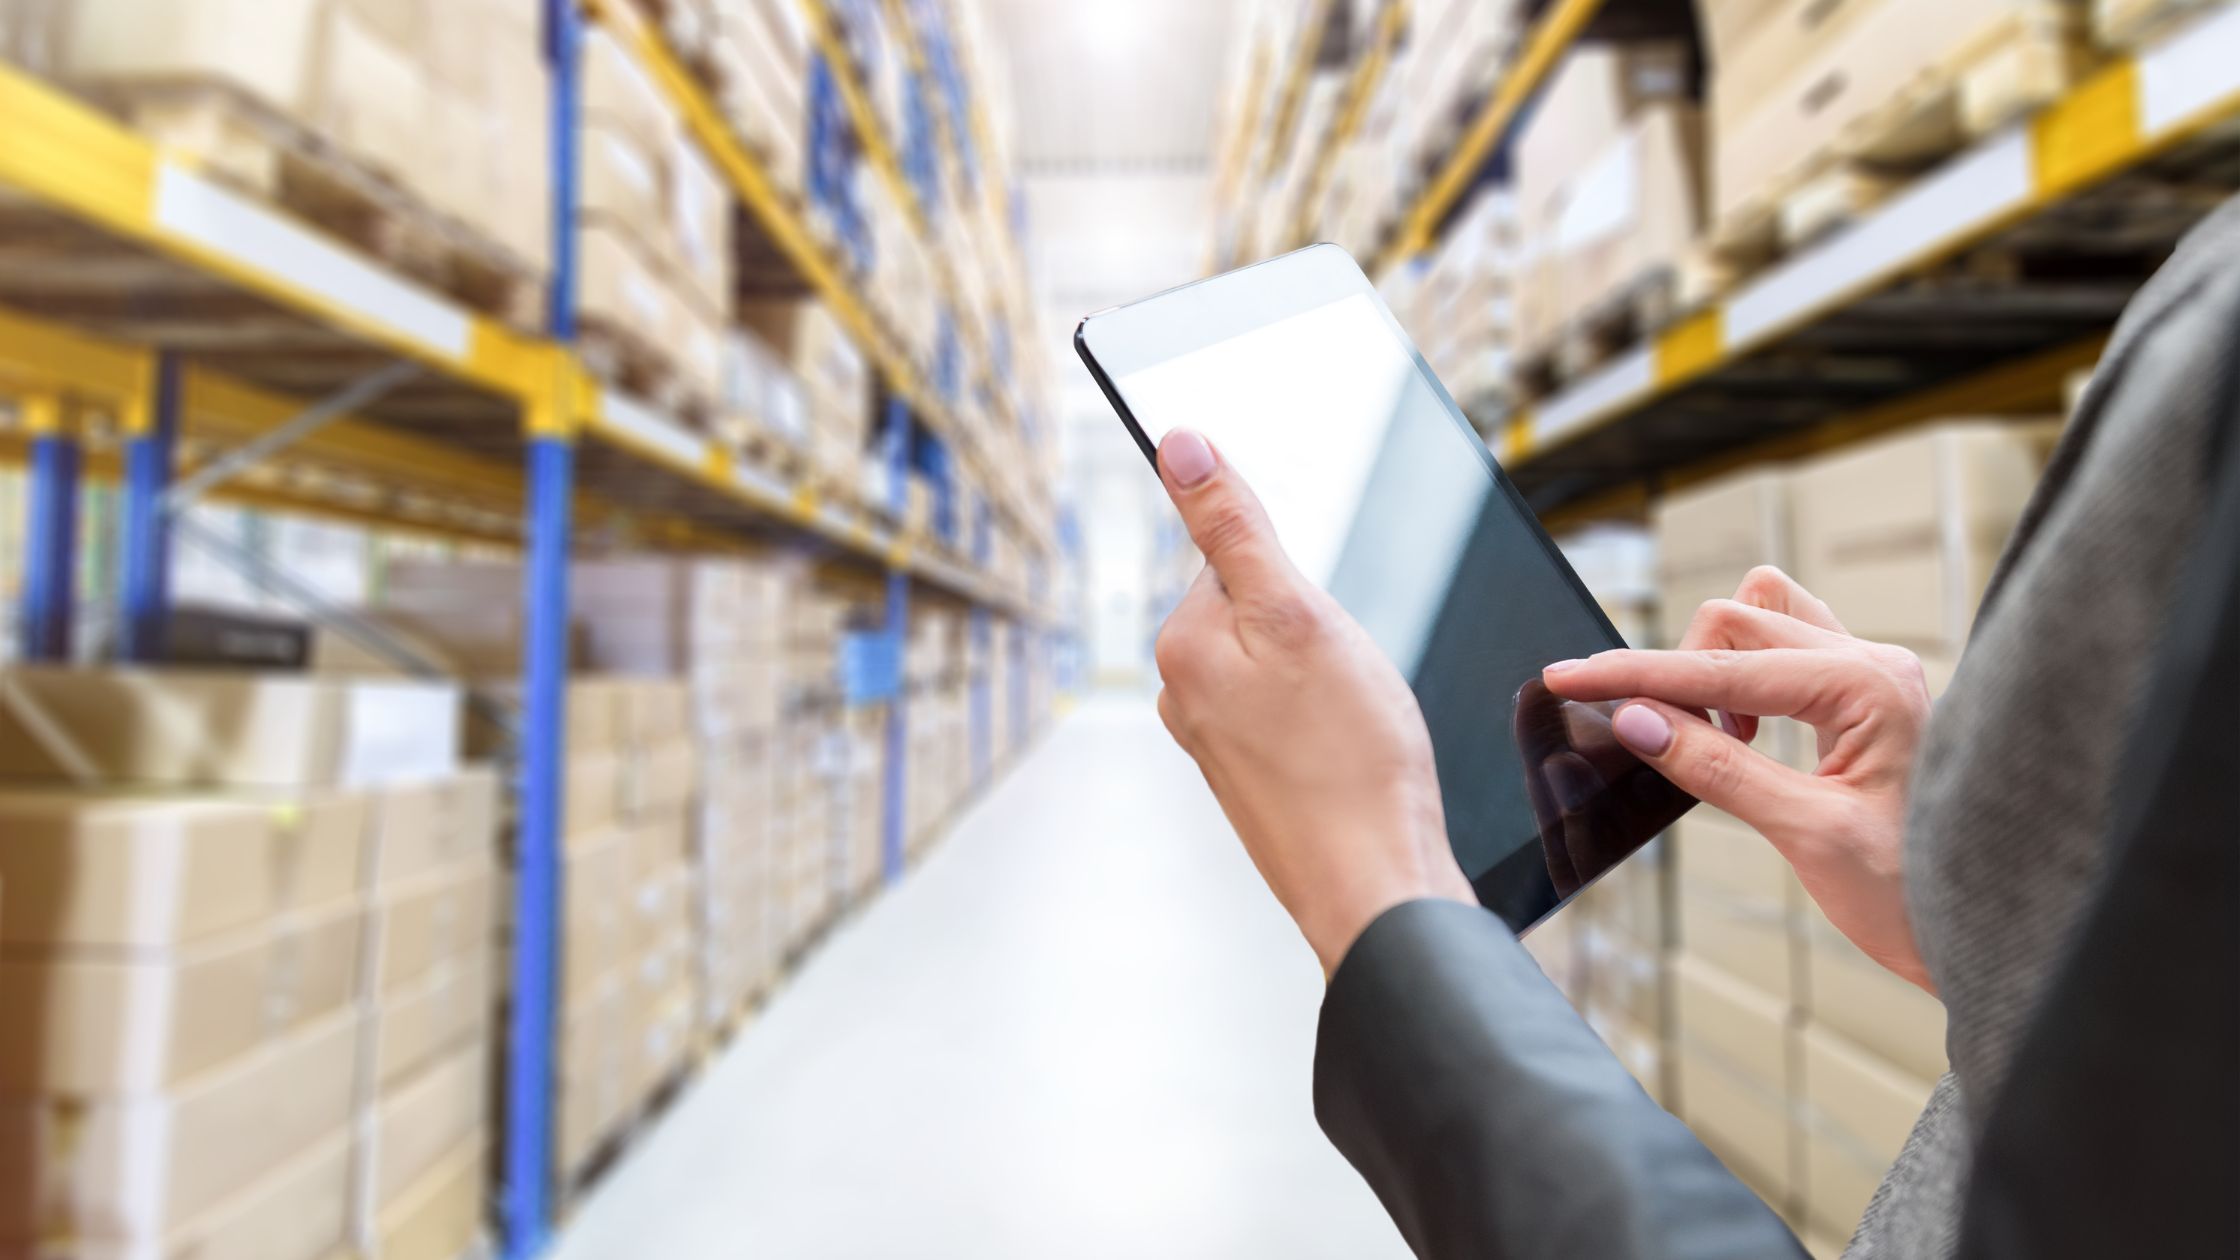 Inventory Visiblity - The Changing Face of B2B Ecommerce